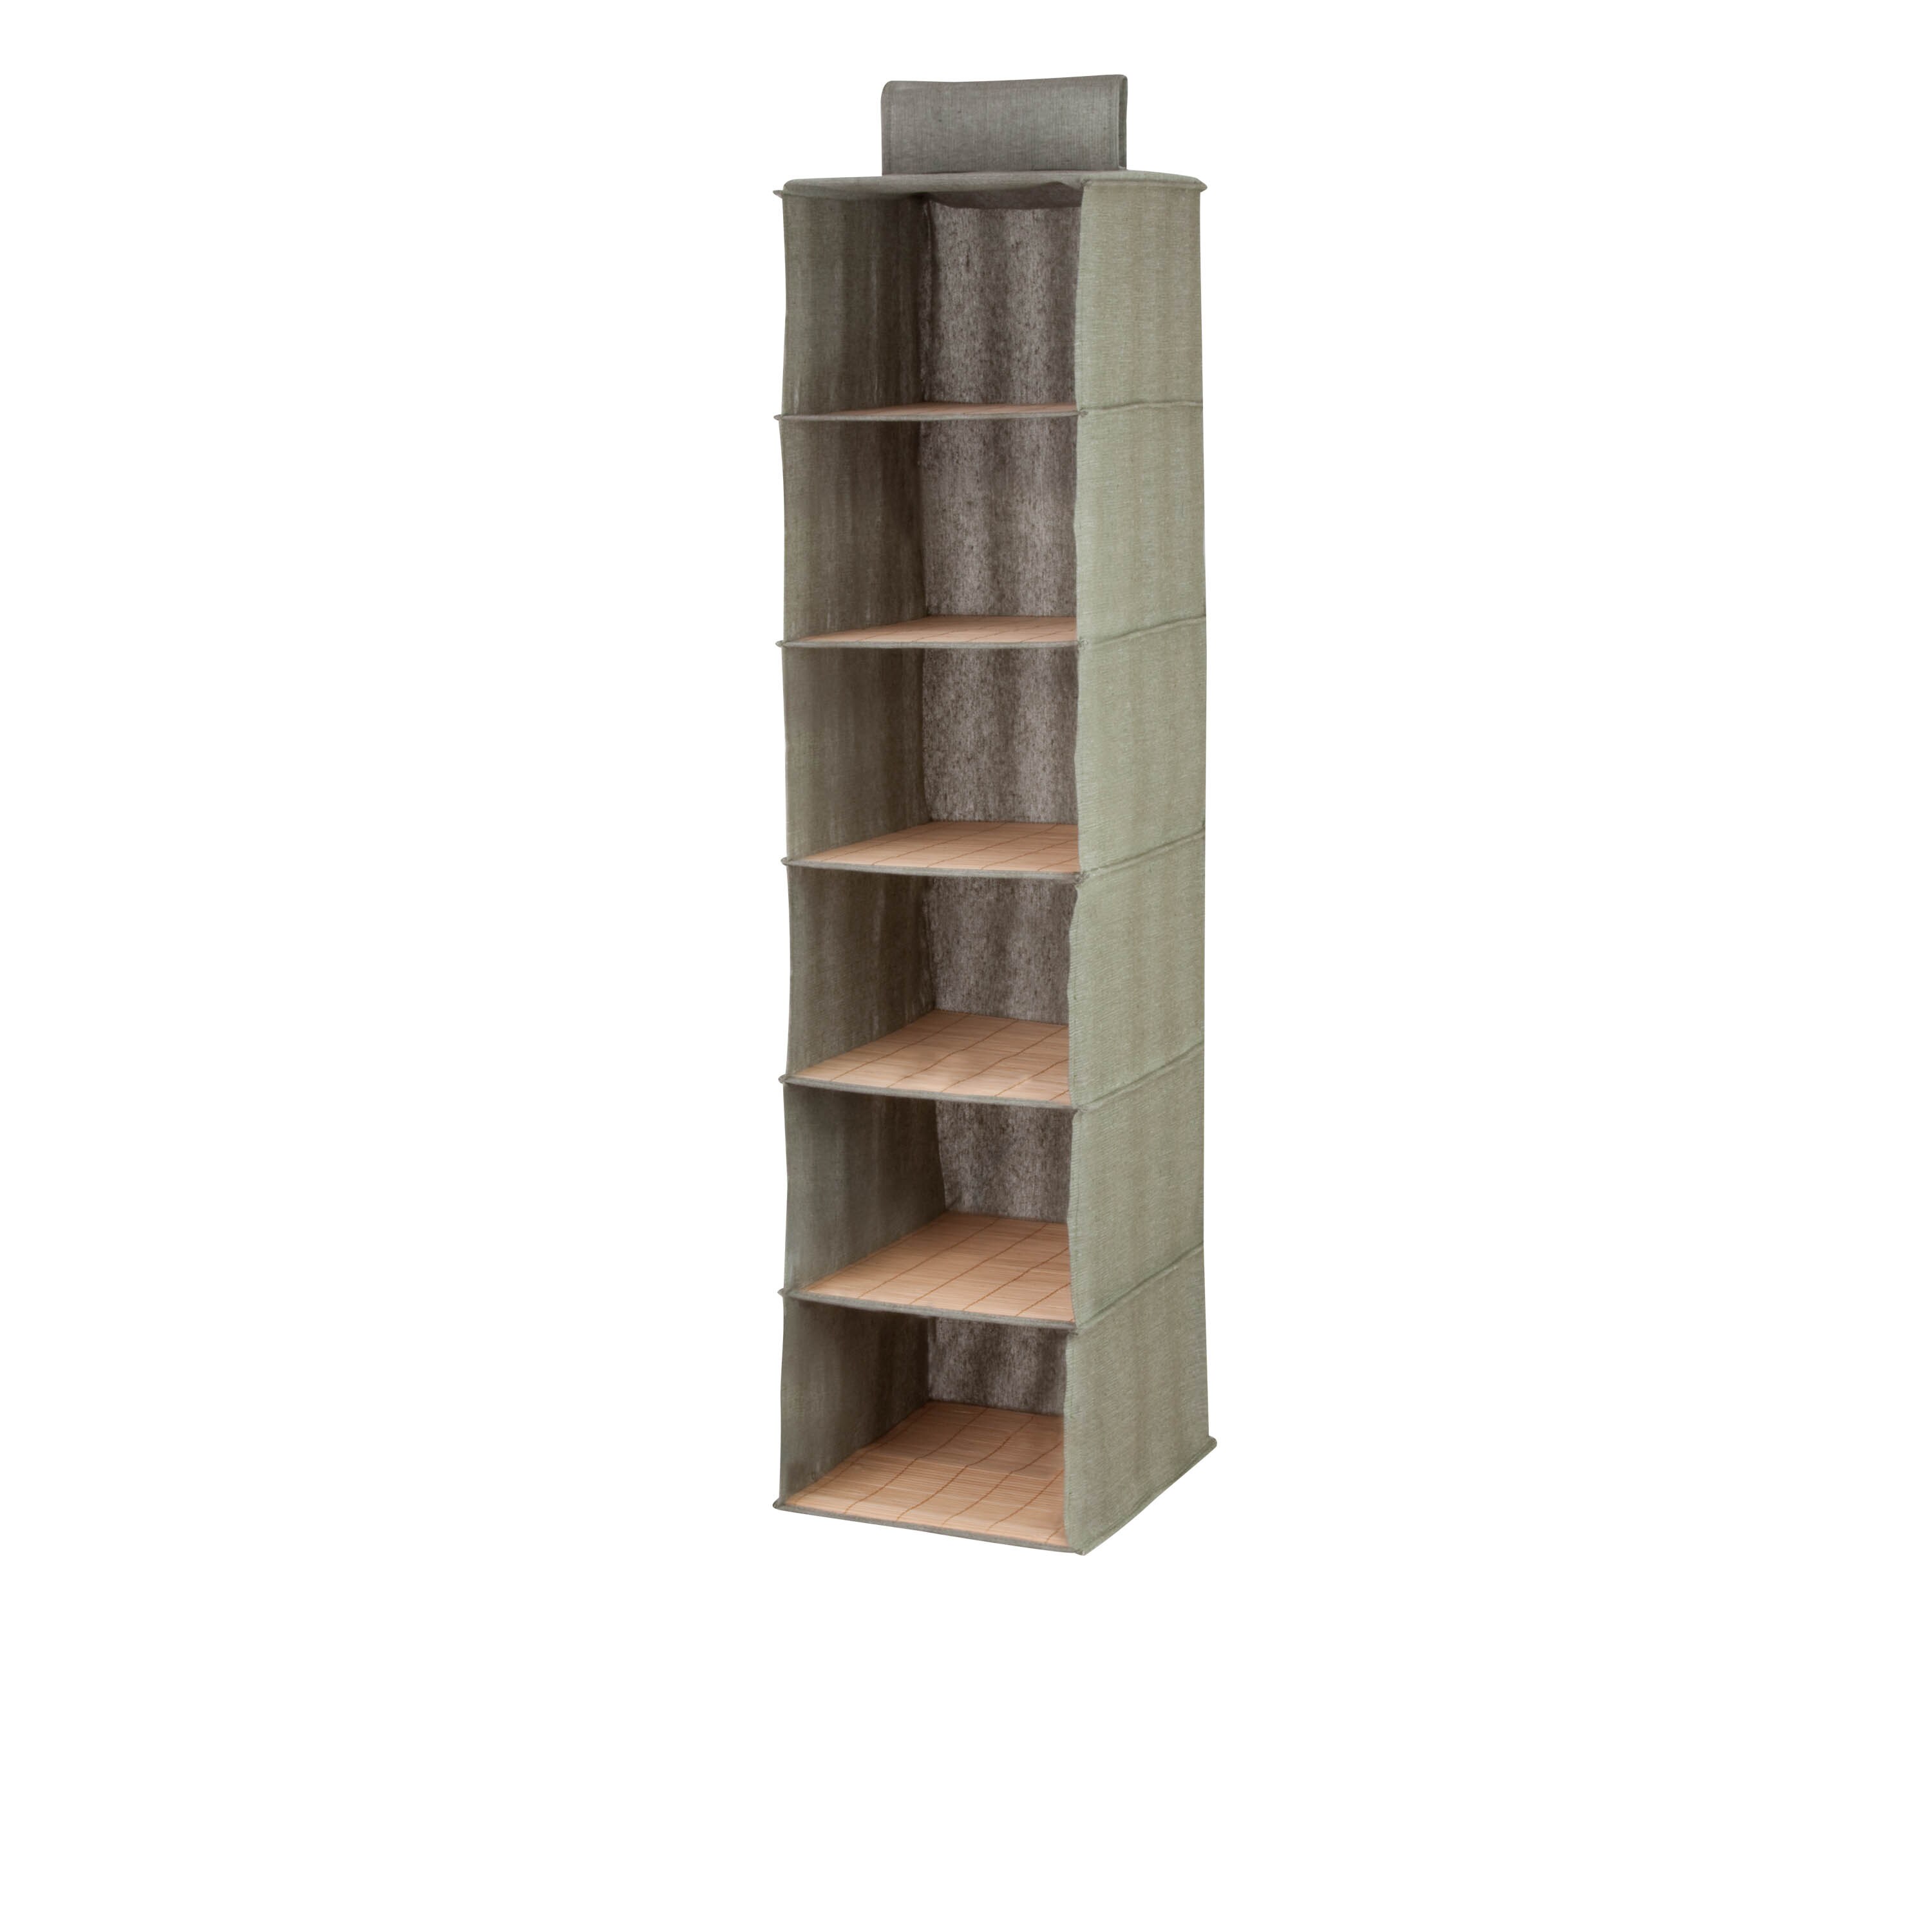 Honey-Can-Do Natural Bamboo/Moss Green Shelf (12-in x 47-in) at Lowes.com